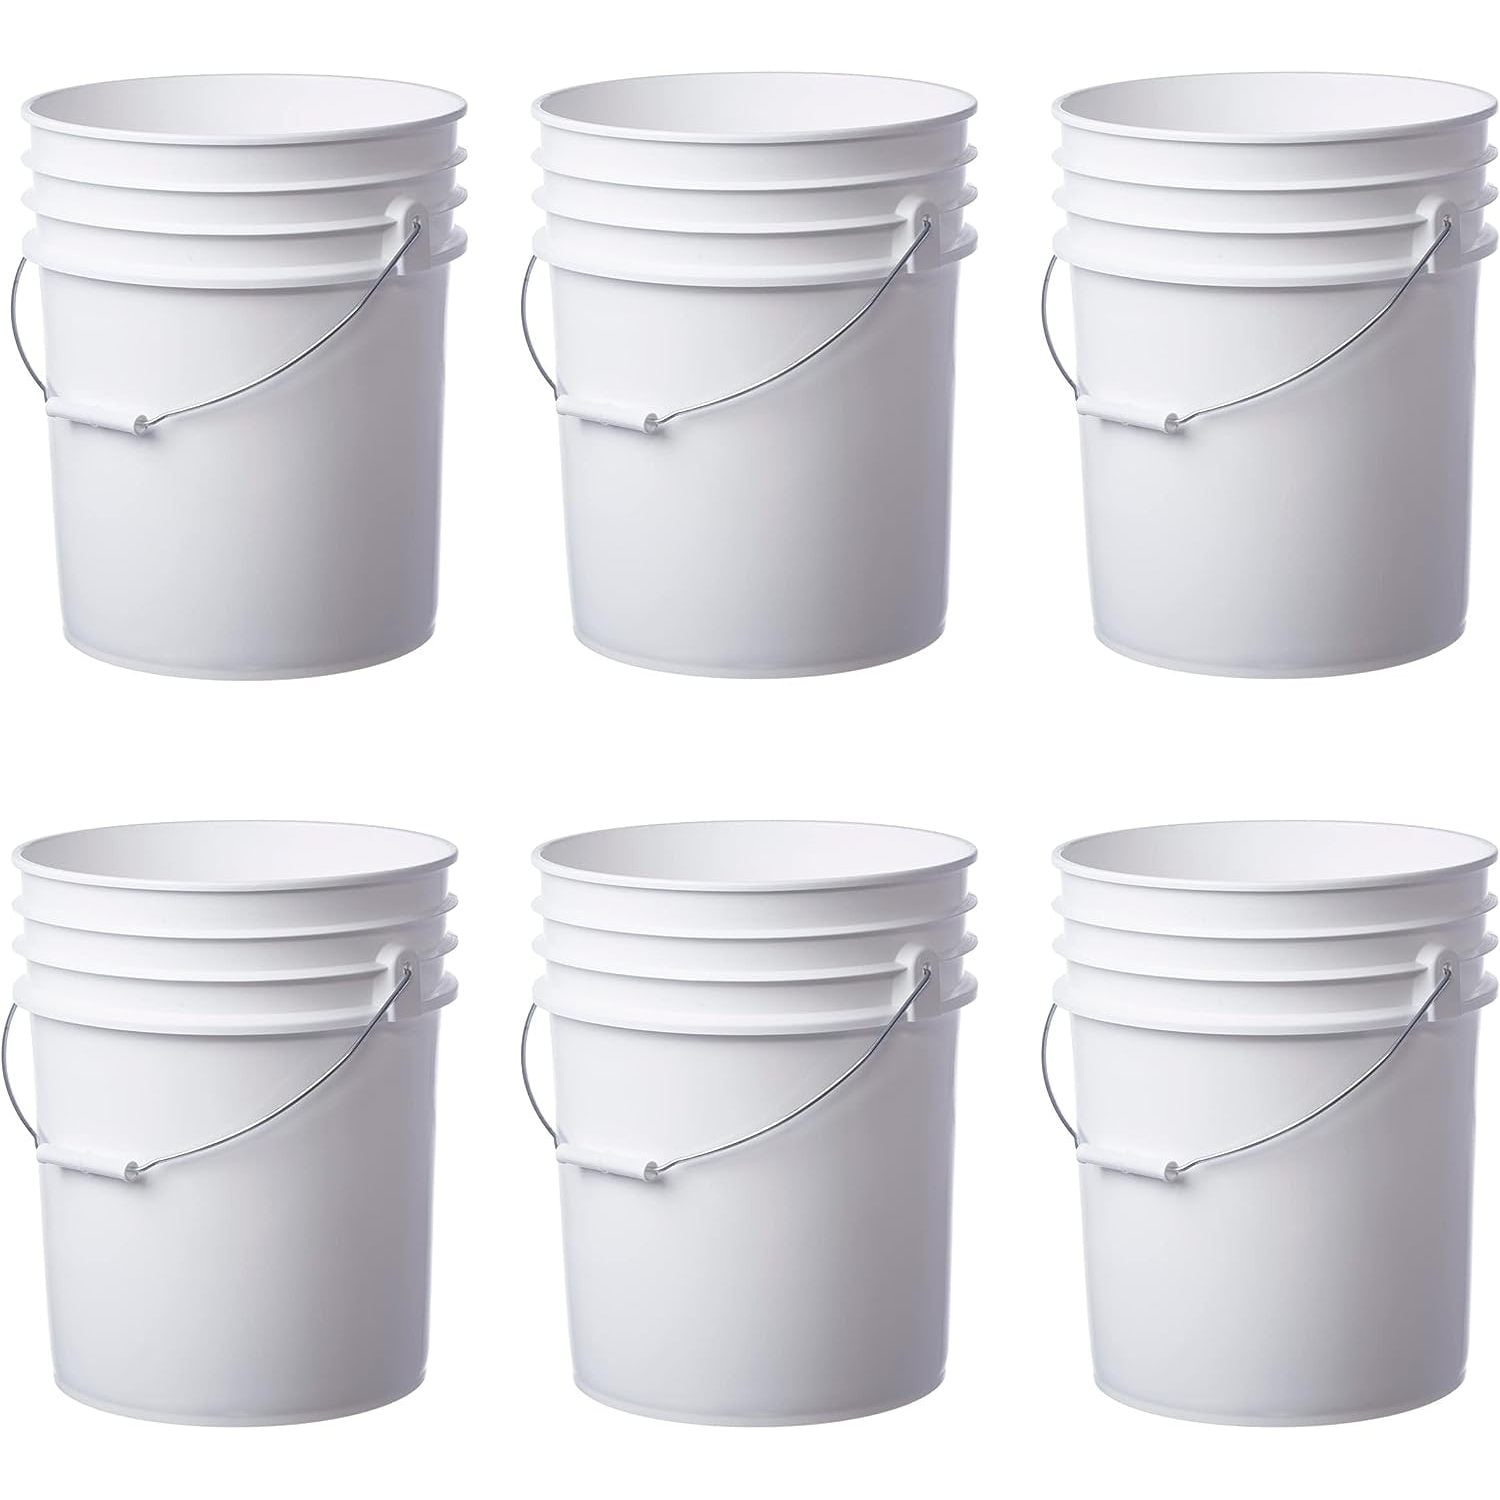  Illing Company (Now Illing Packaging) Premium 1 Gallon Bucket,  HDPE, White, 5 Pack with Matching Lids, All Purpose Pail, No BPA Plastic,  Food Grade, Metal Handle w/Thick Plastic Grip : Industrial